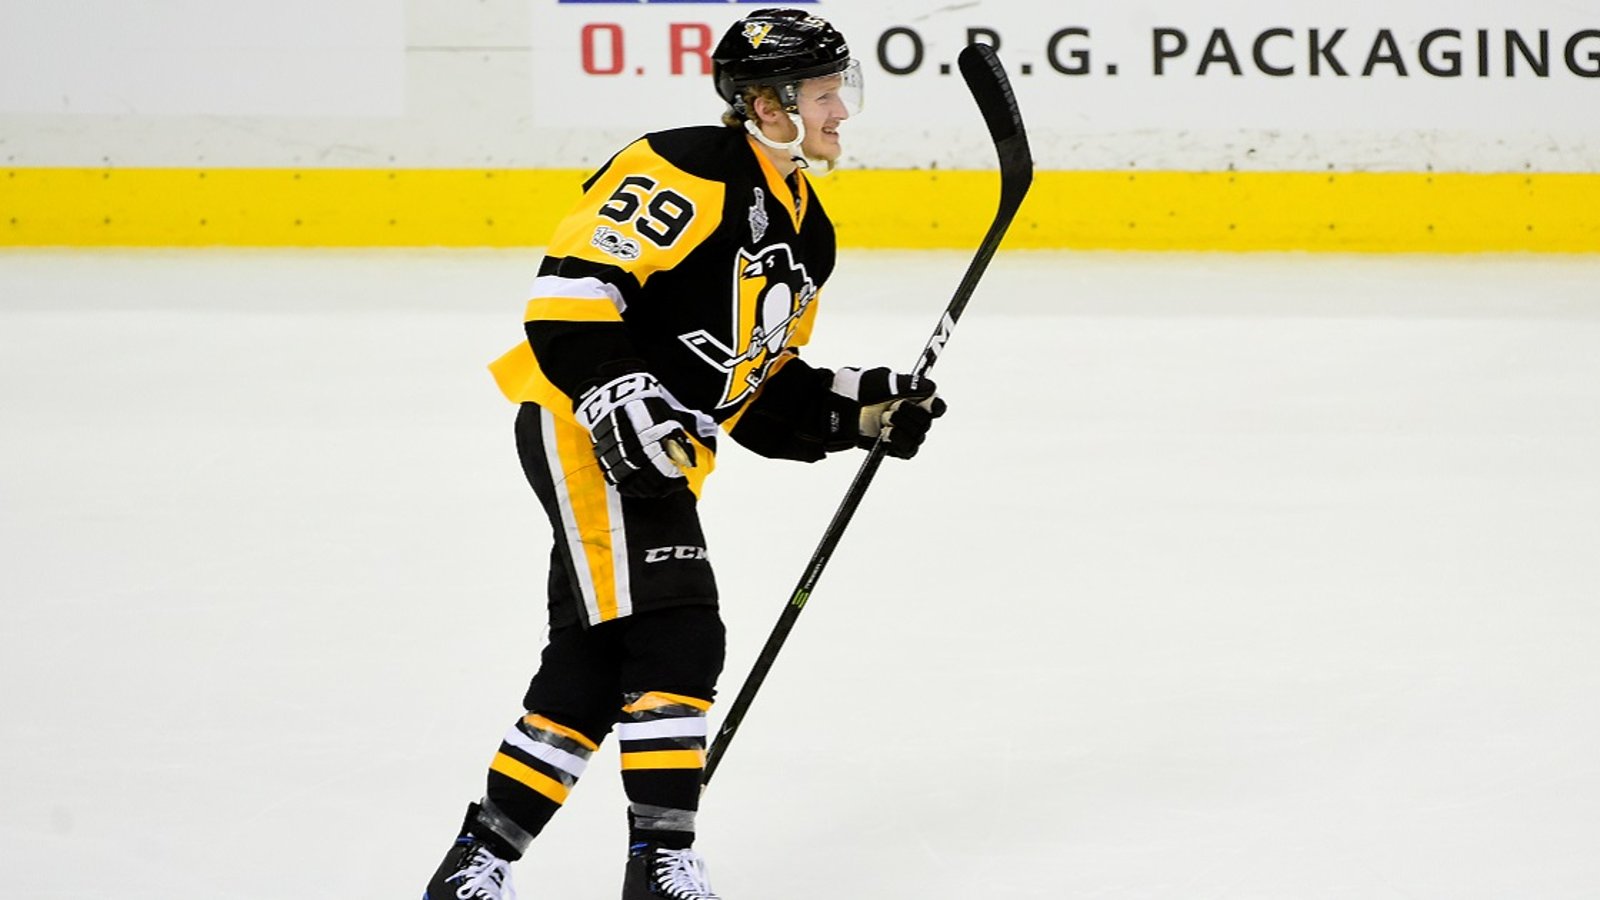 Jake Guentzel provides an injury update and delivers a statement on the death of George Floyd.